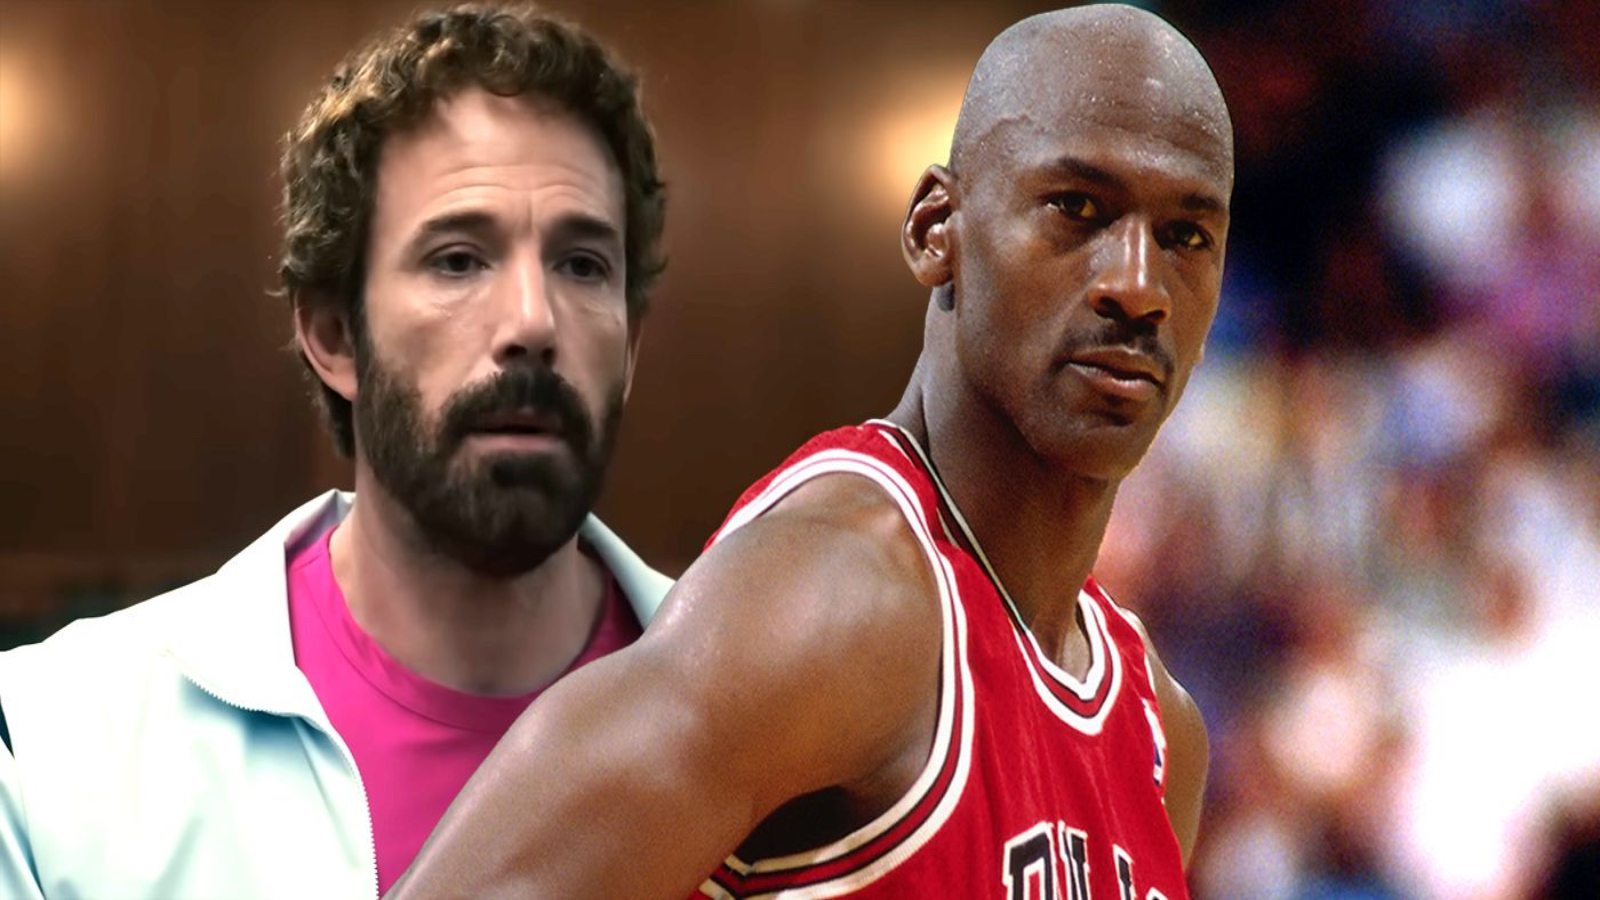 Air, Ben Affleck on his friendship with Michael Jordan: "Let's play cards together"